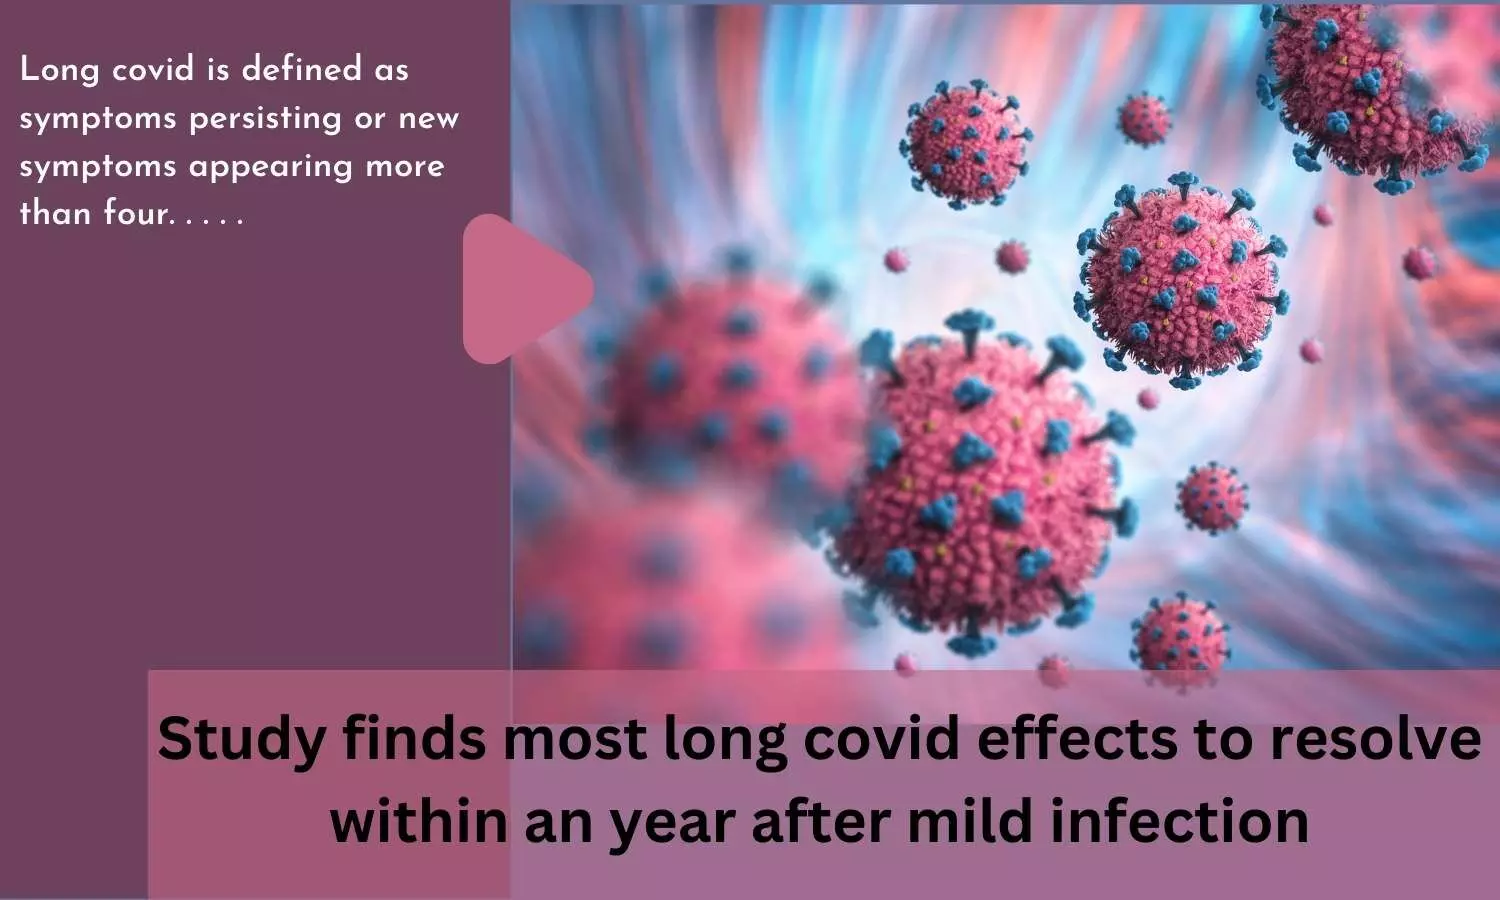 Study finds most long covid effects to resolve within an year after mild infection